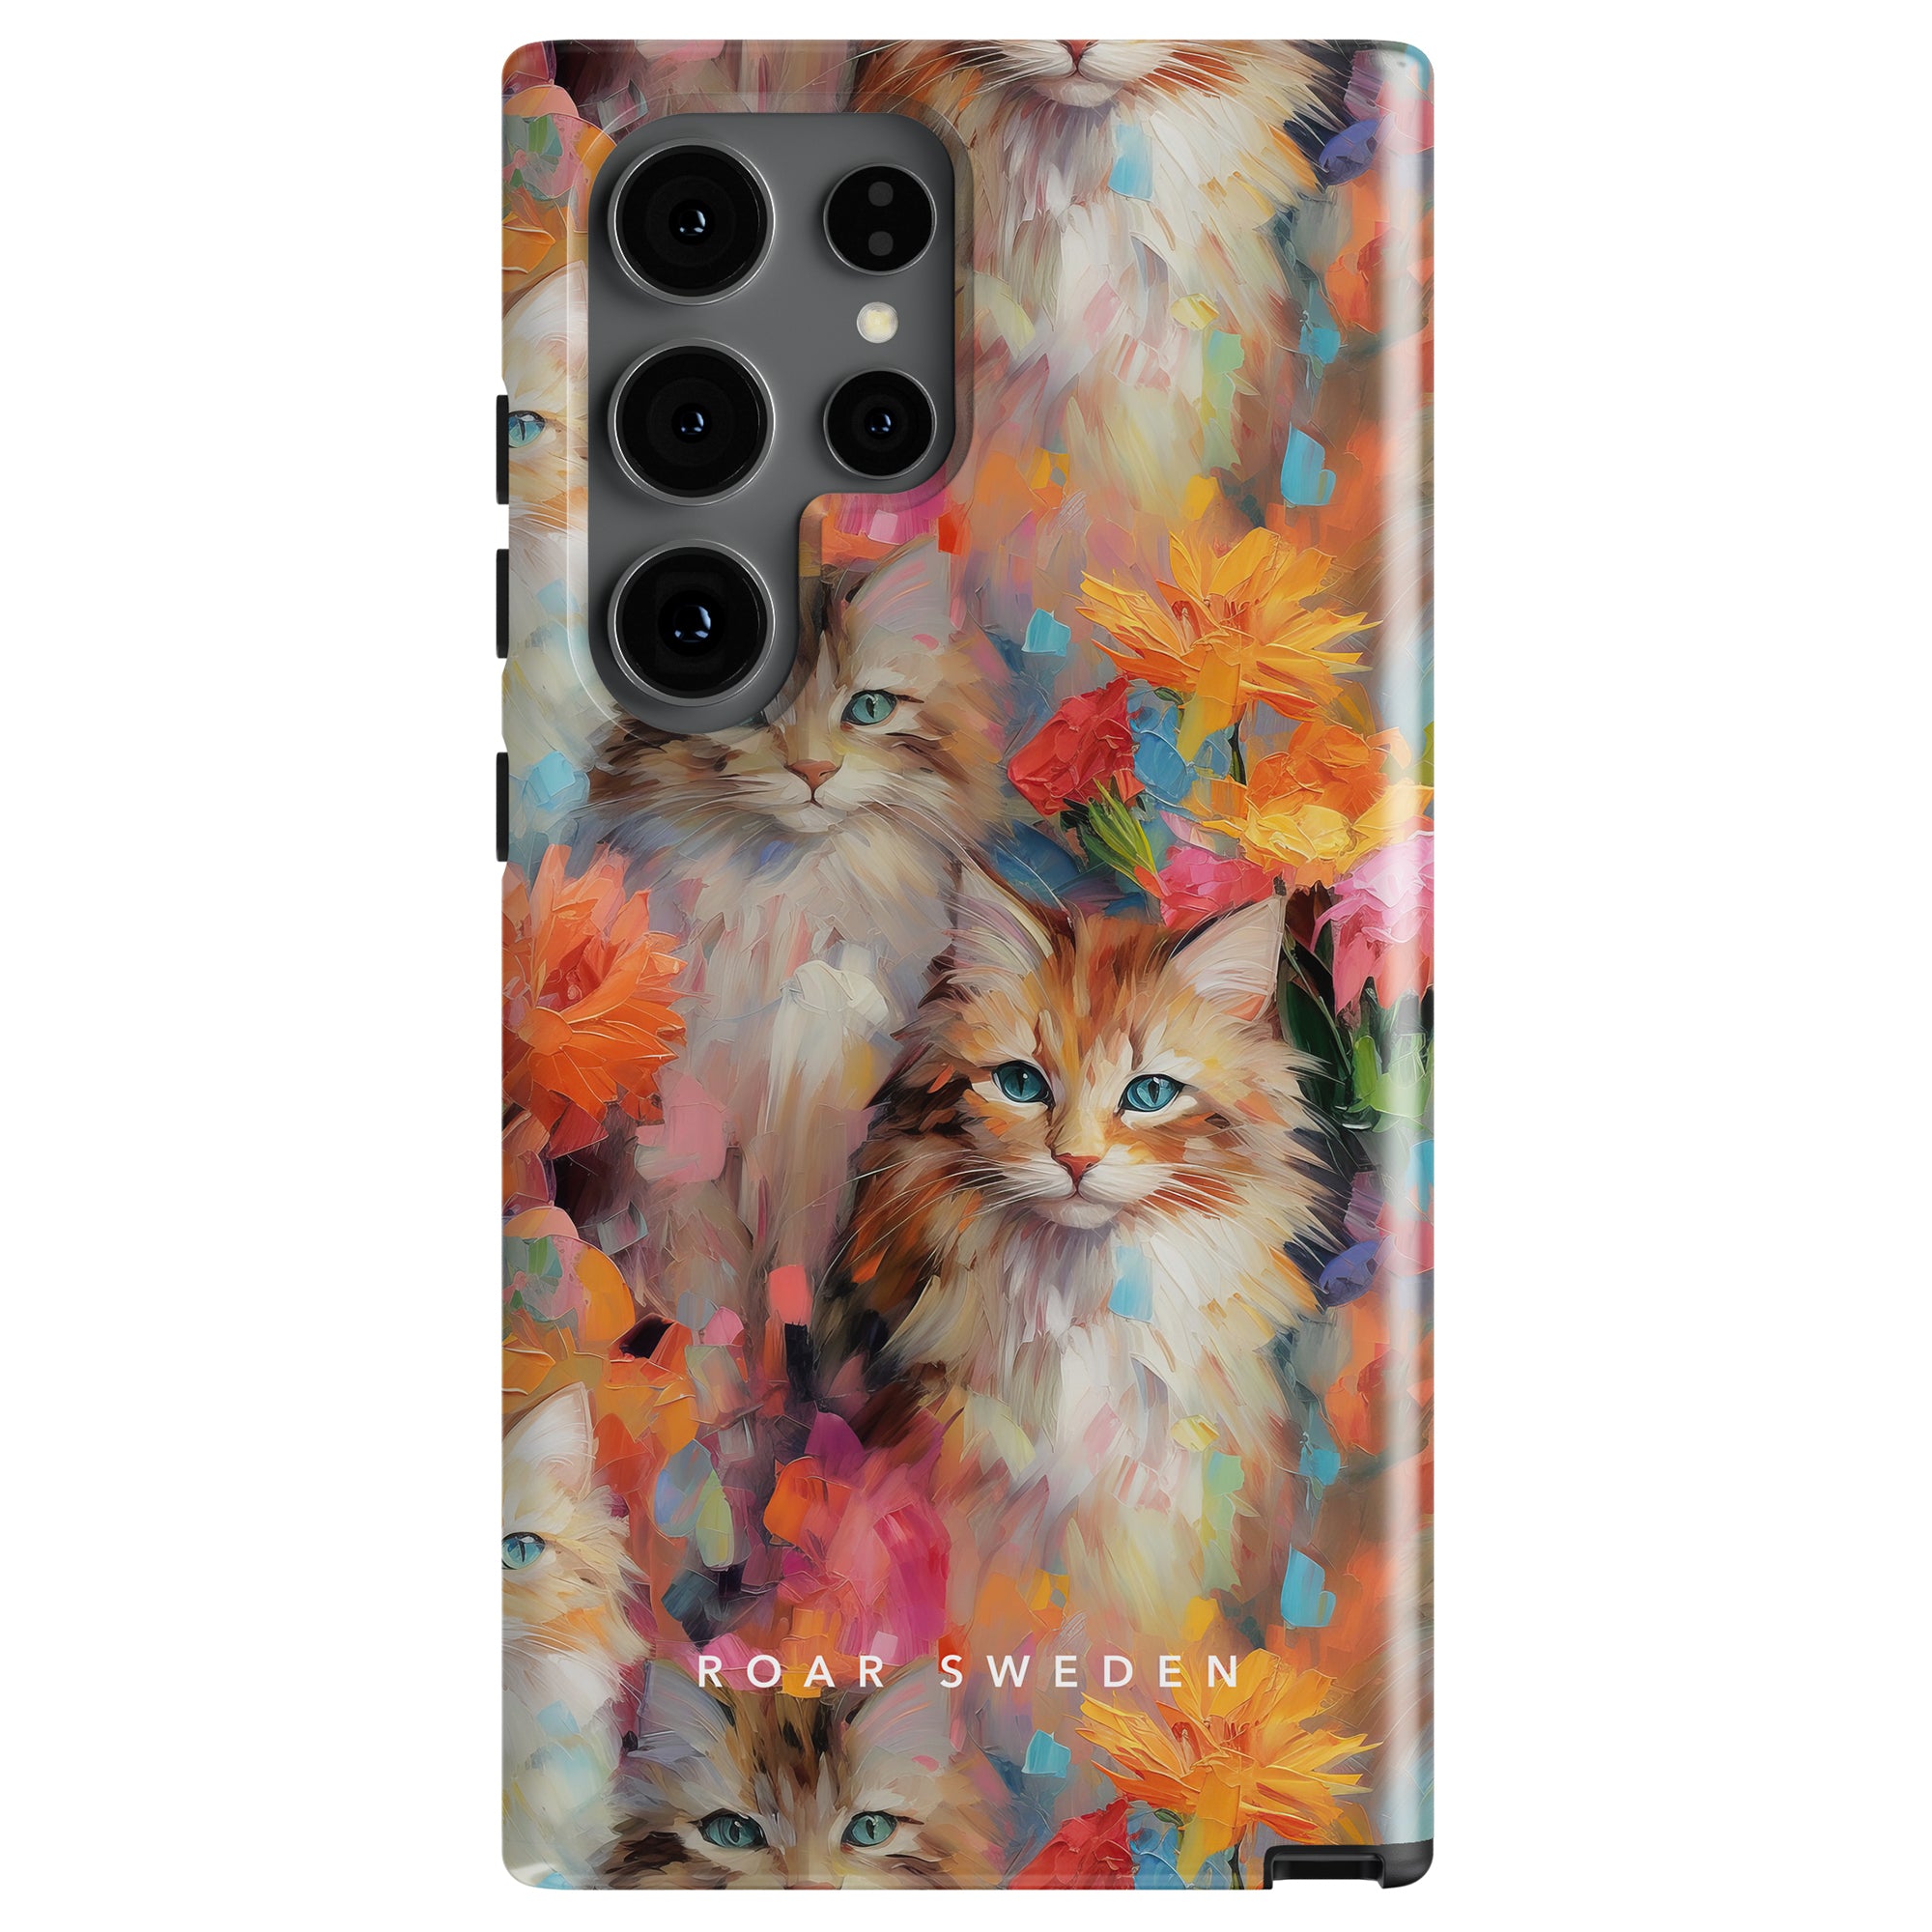 A phone with a Flower Kitty - Tough Case featuring a colorful, artistic illustration of cats and flowers. This premium skydd mobilskal also has "ROAR SWEDEN" written on the bottom.